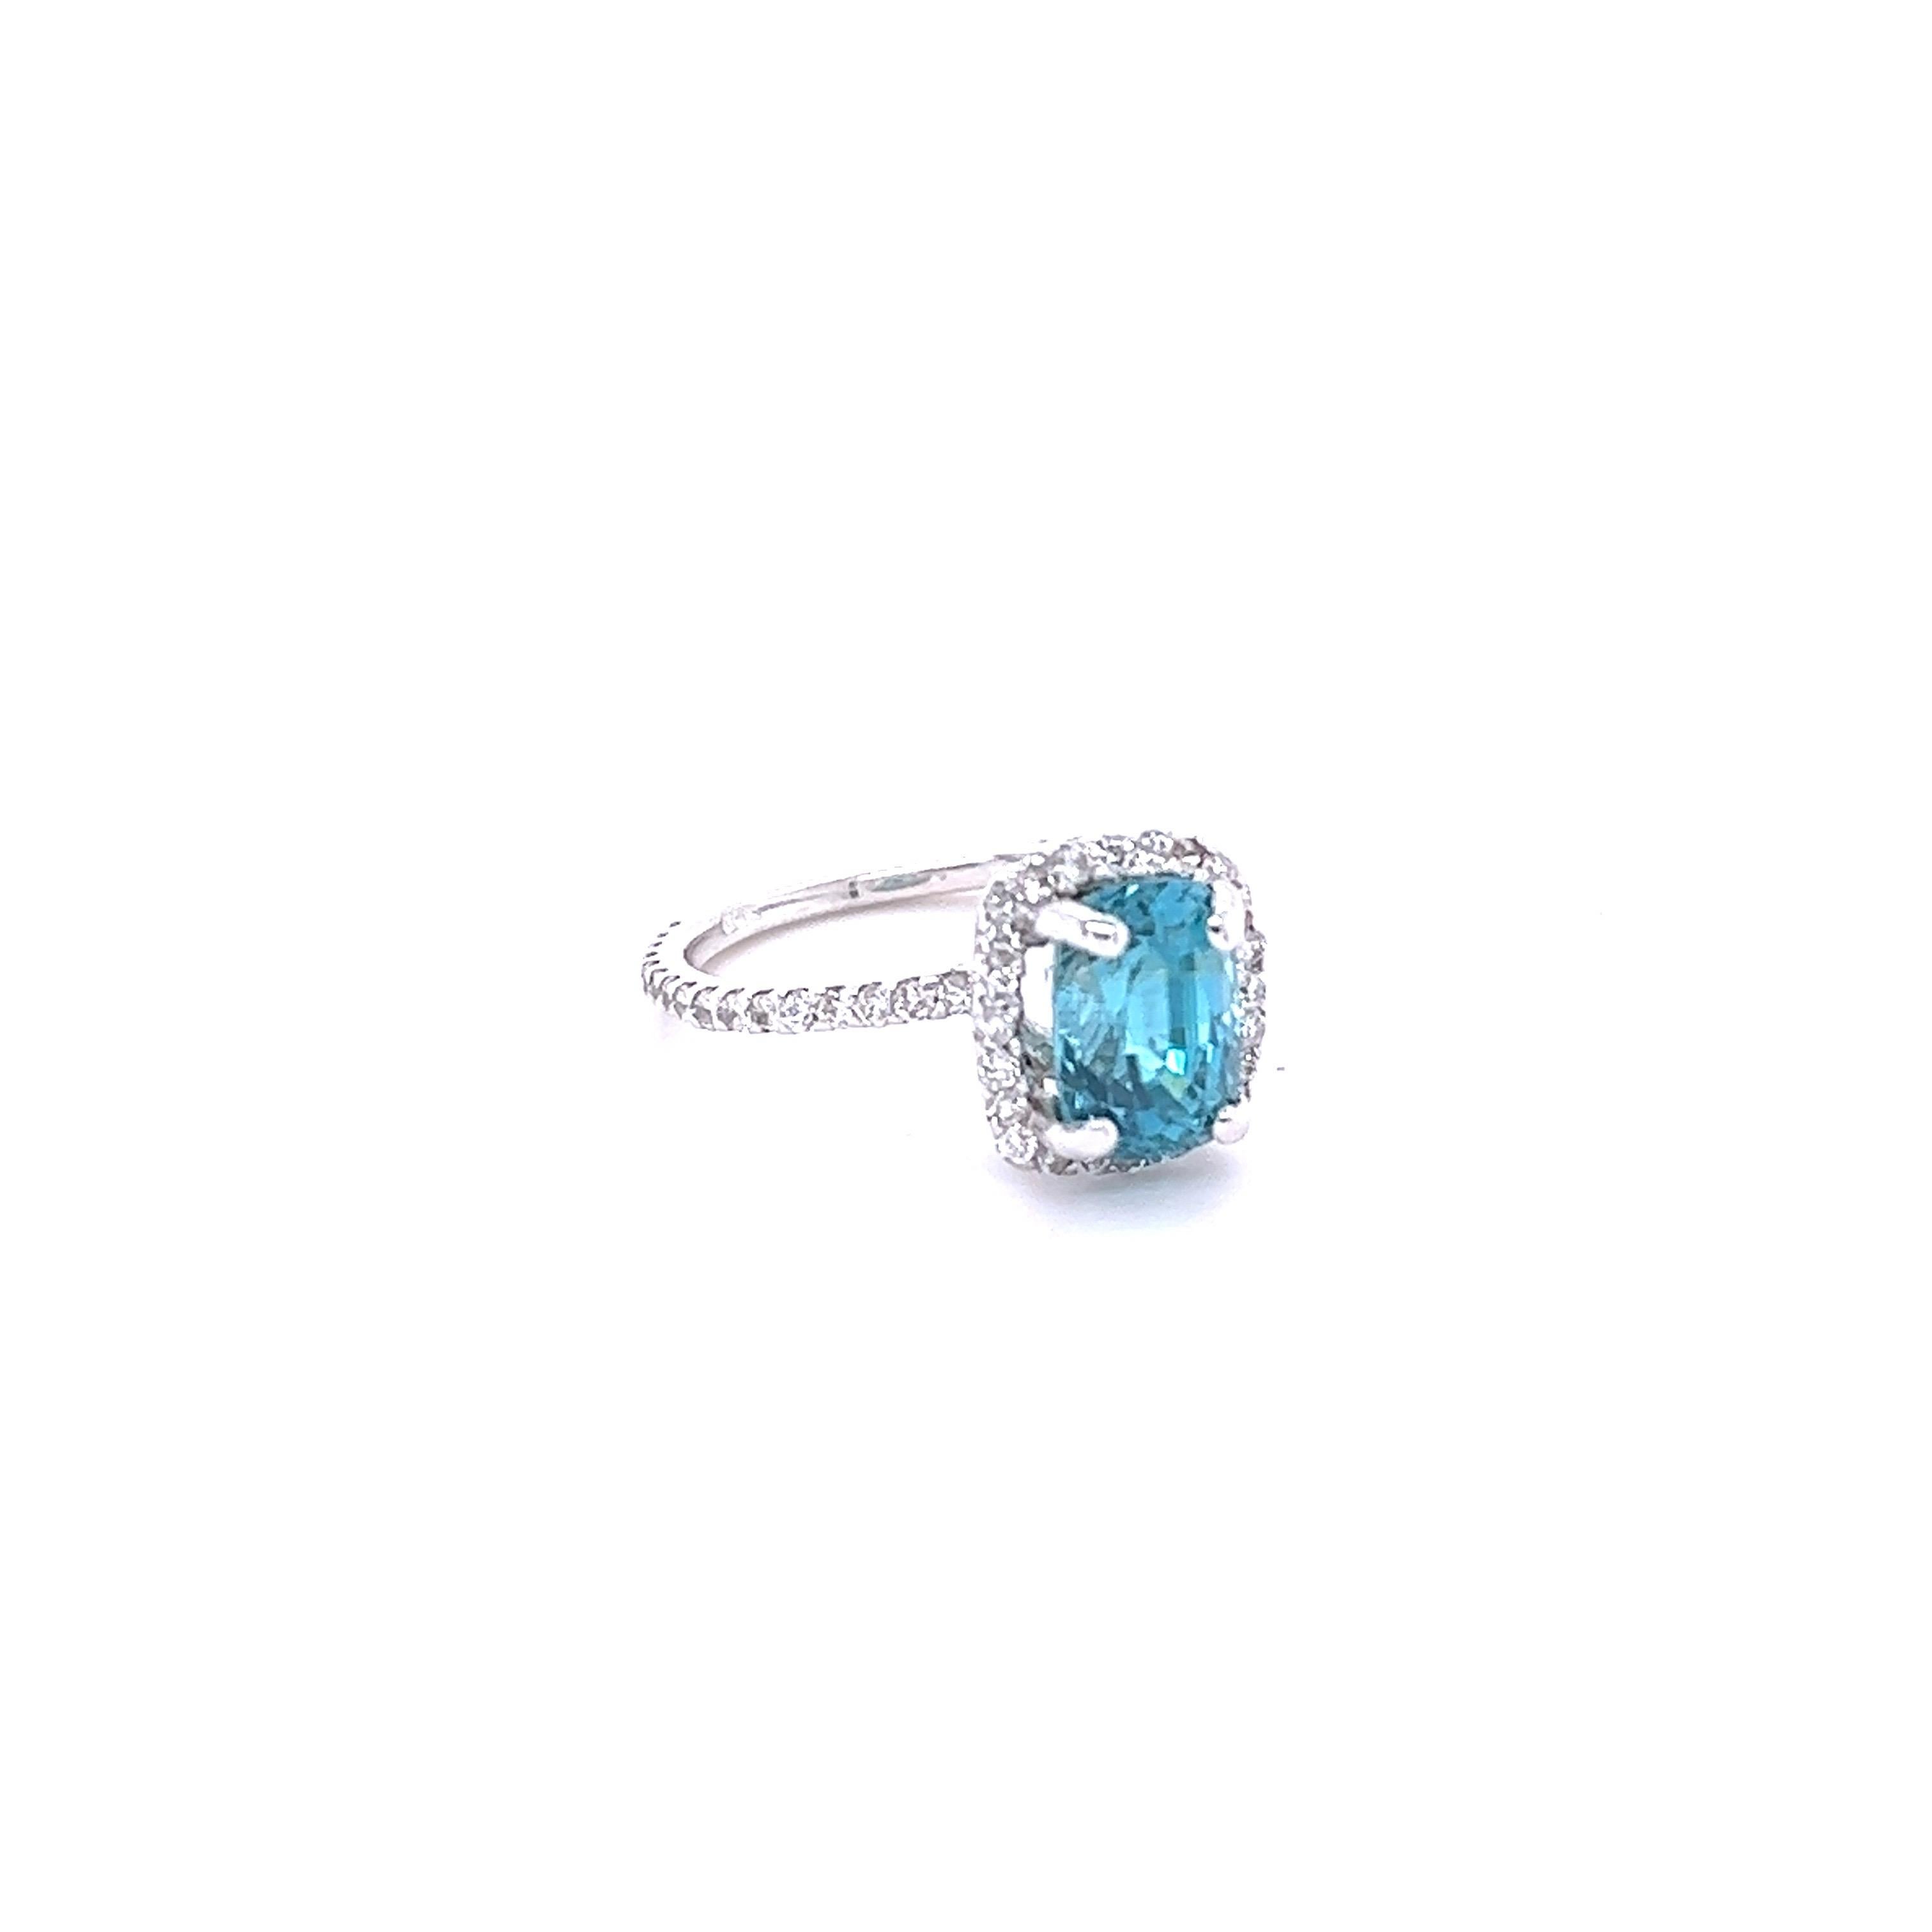 A beautiful Blue Zircon and Diamond ring that can be a nice Engagement ring or just an everyday ring!
Blue Zircon is a natural stone mined mainly in Sri Lanka, Myanmar, and Australia.  
This ring has a Oval-Cushion Cut Blue Zircon that weighs 3.80